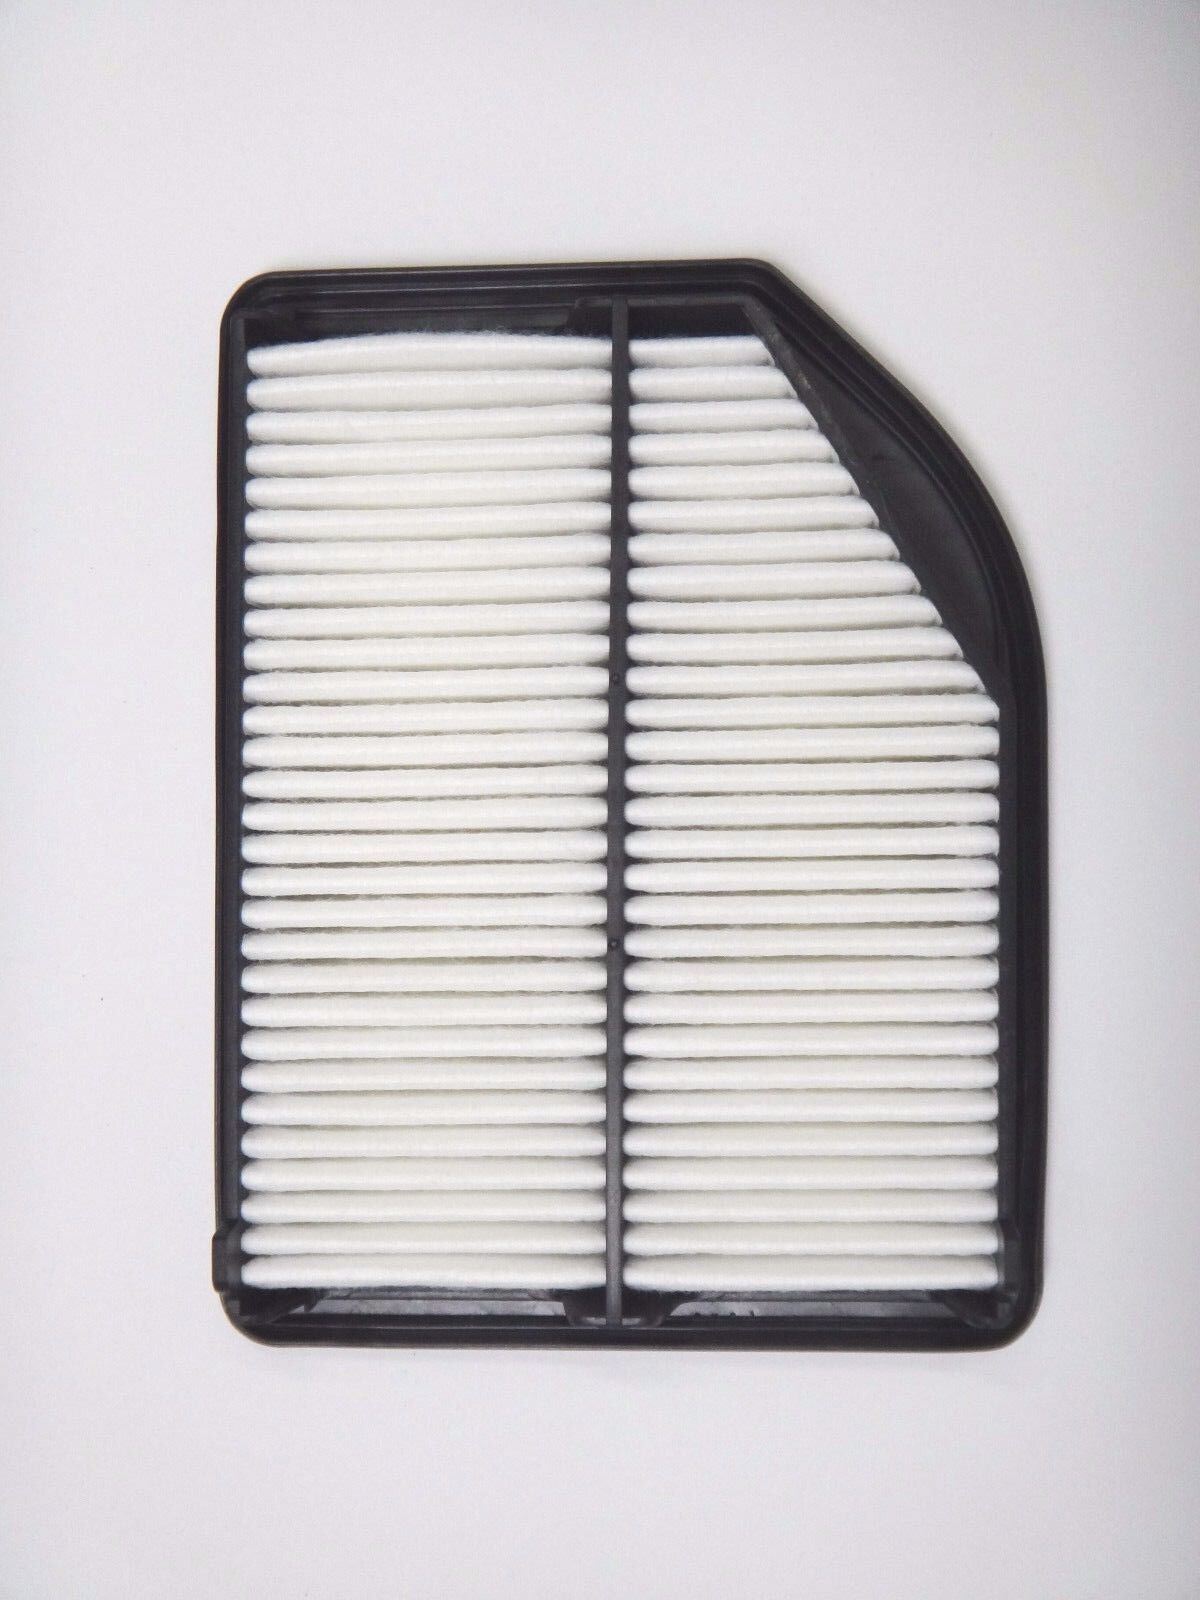 Engine Air Filter for HONDA CRV 2012-2014 CR-V Fast Shipping GREAT FIT